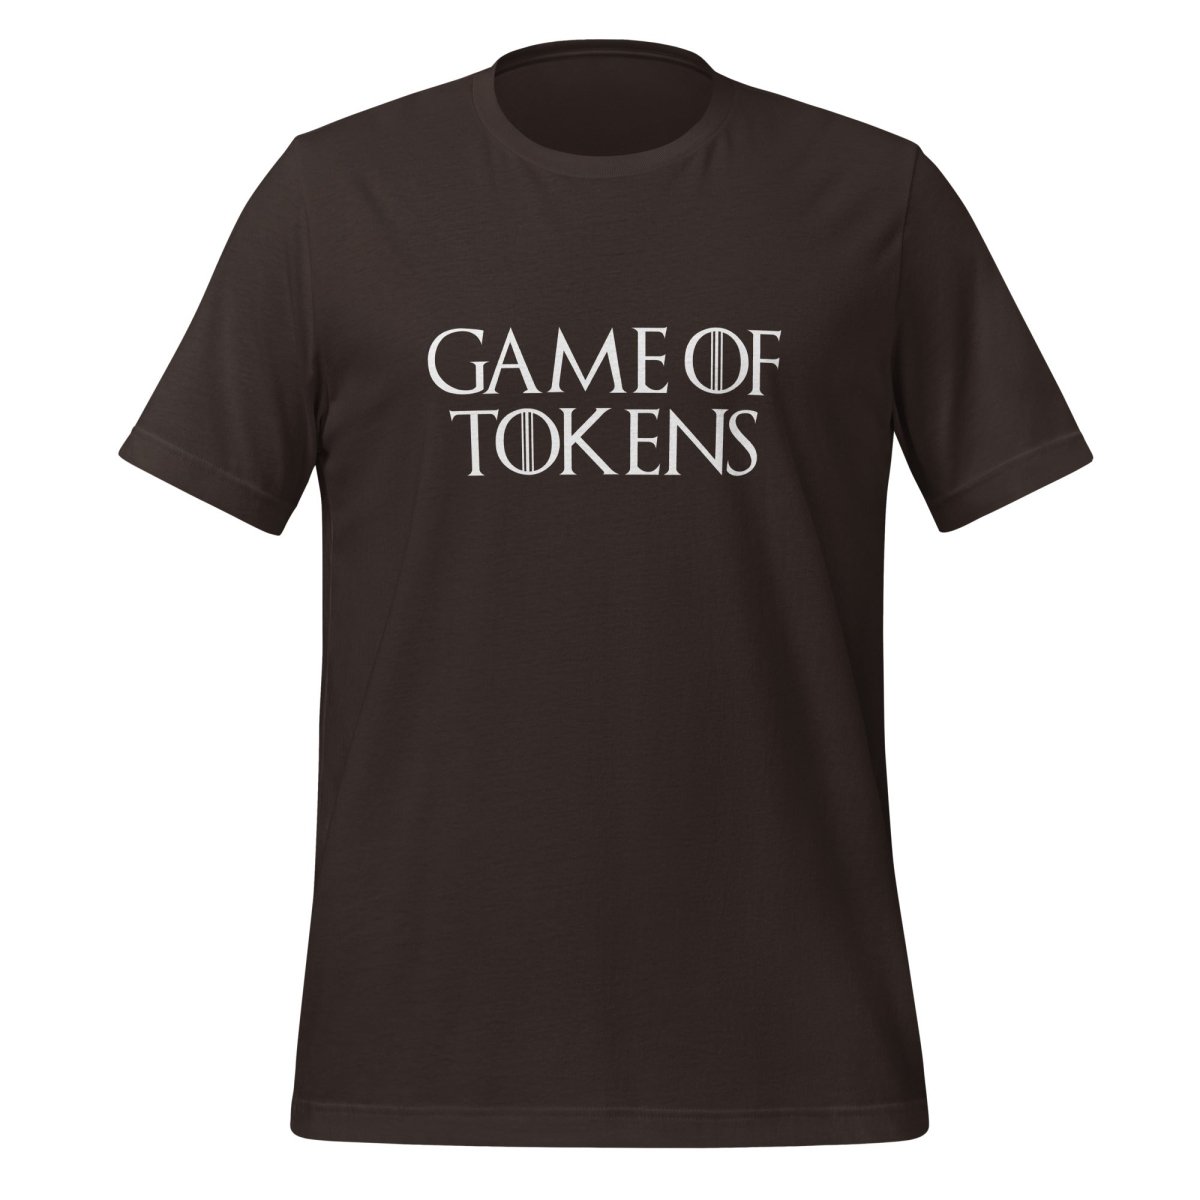 Game of Tokens T - Shirt (unisex) - Brown - AI Store